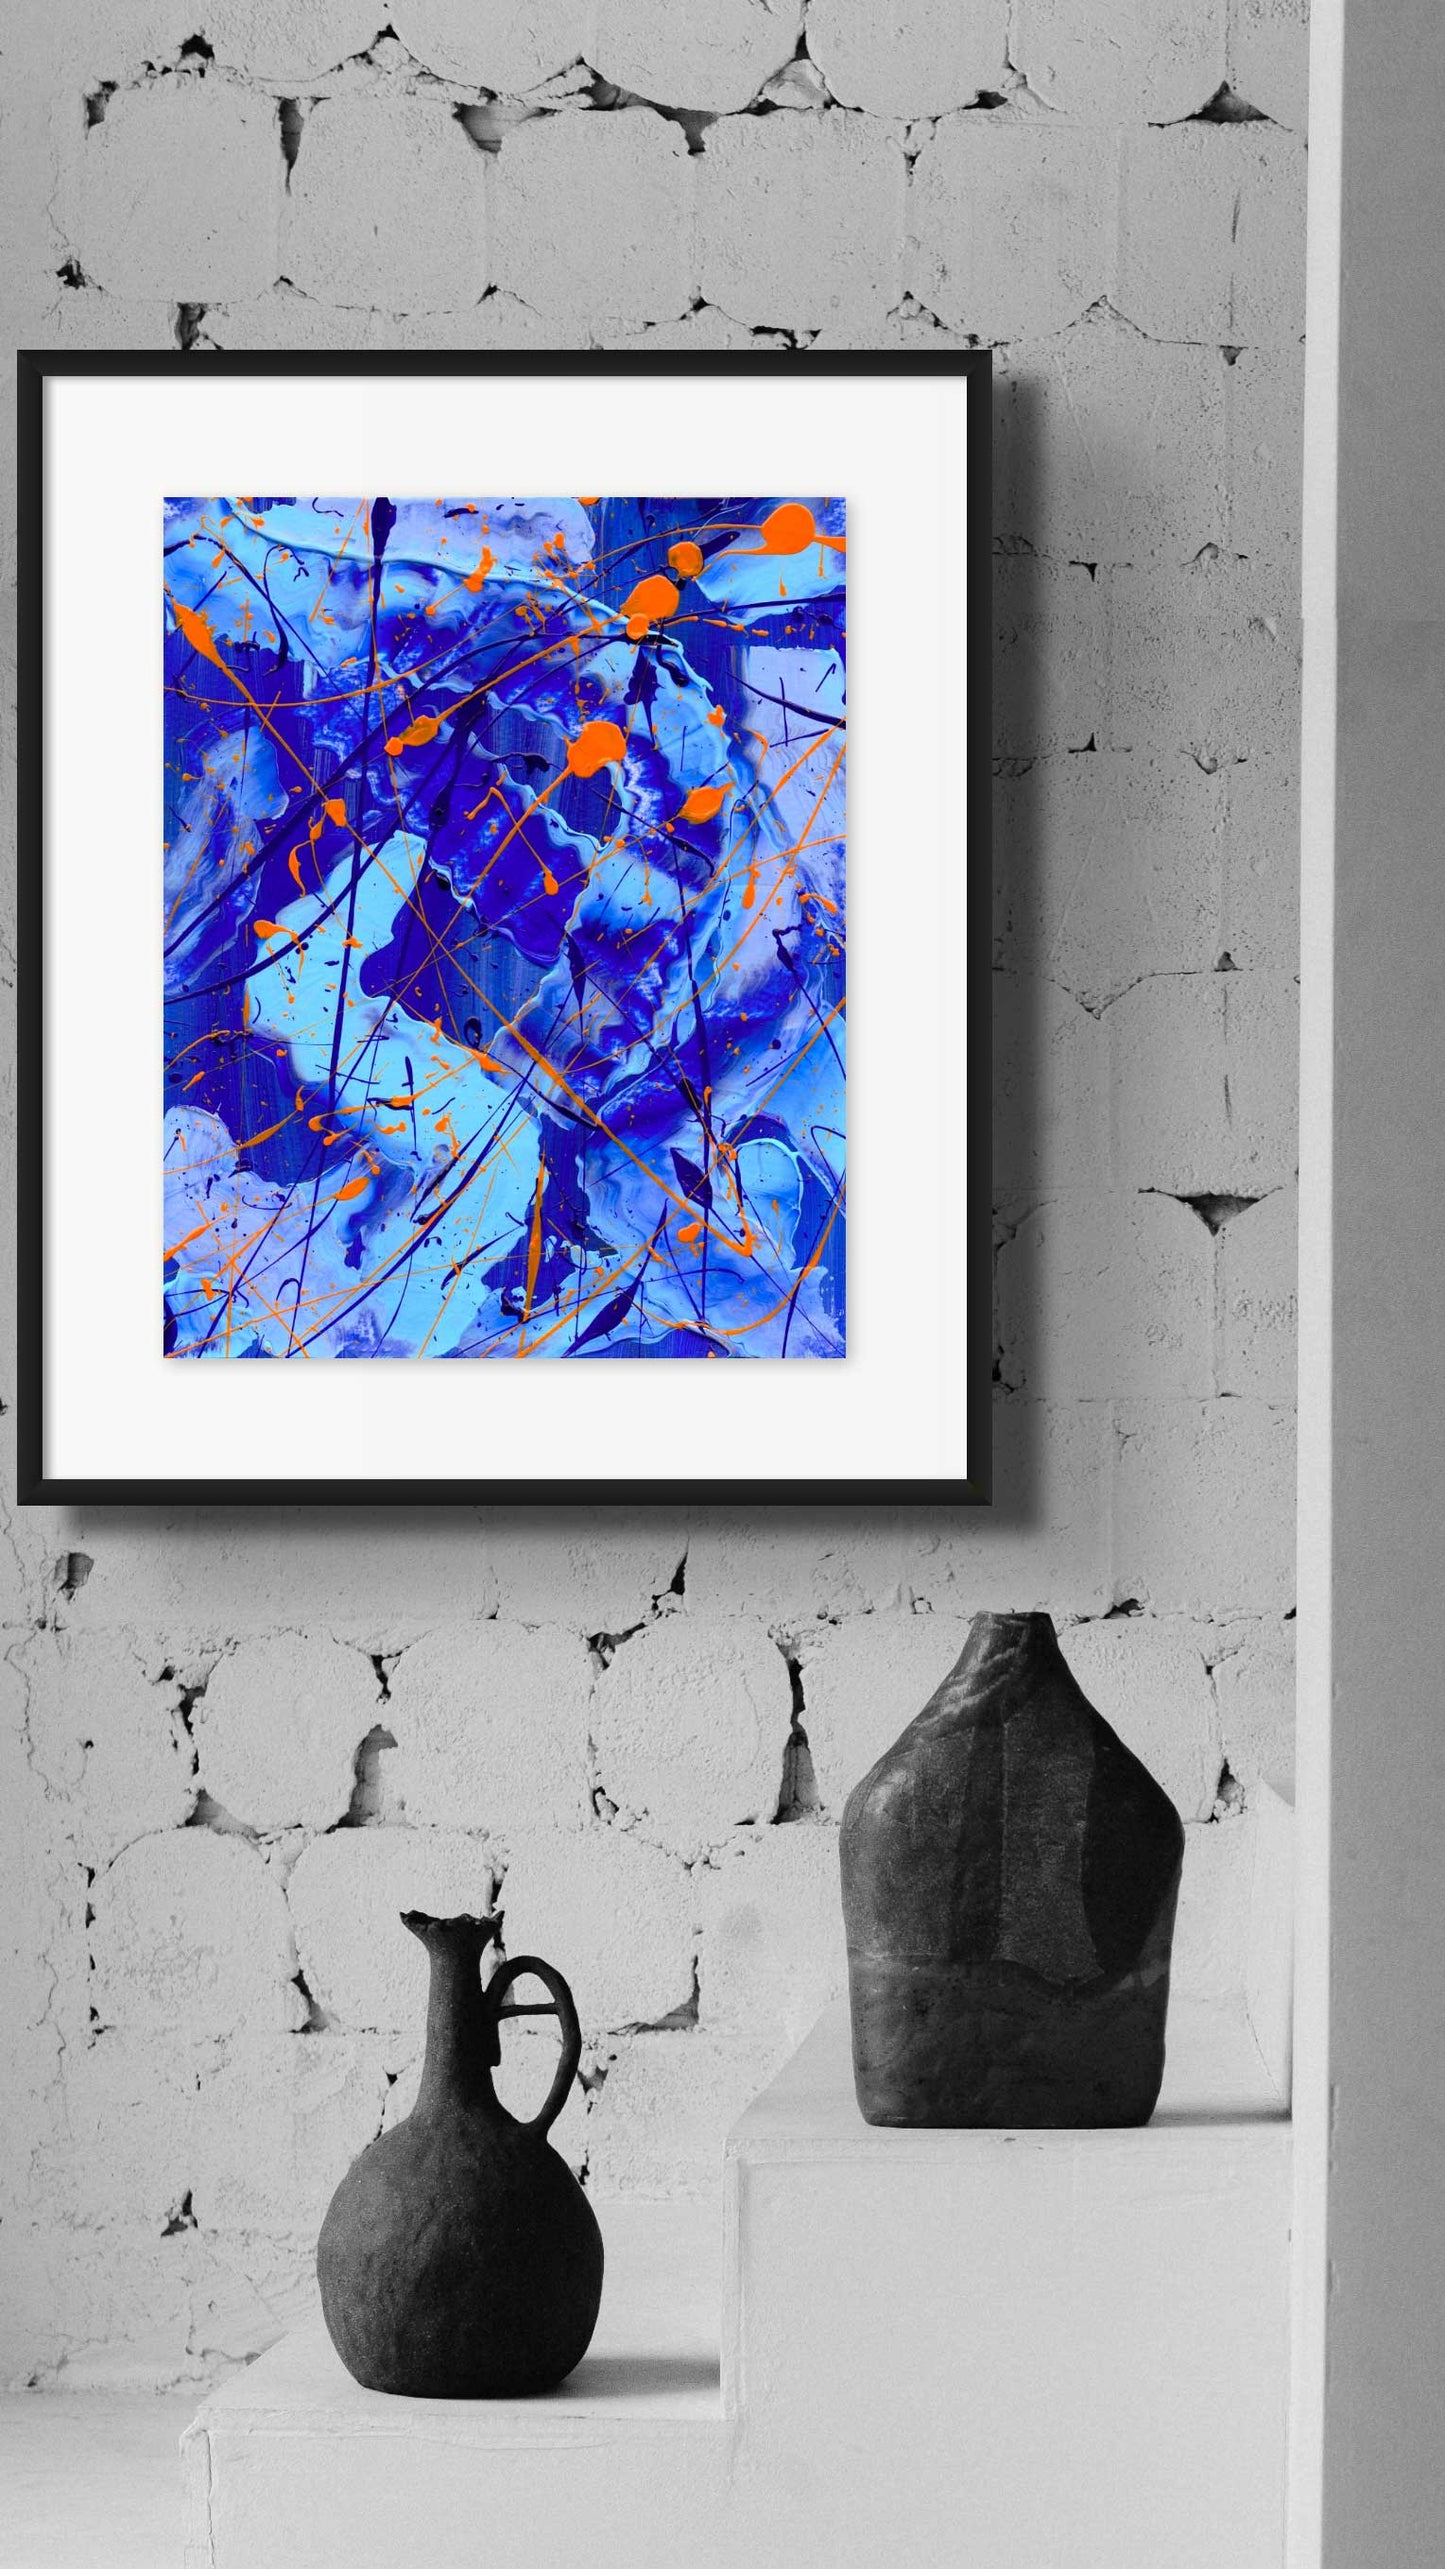 Blue I, original painting seen framed hanging on brick wall. Abstract wall art on paper by Bridget Bradley